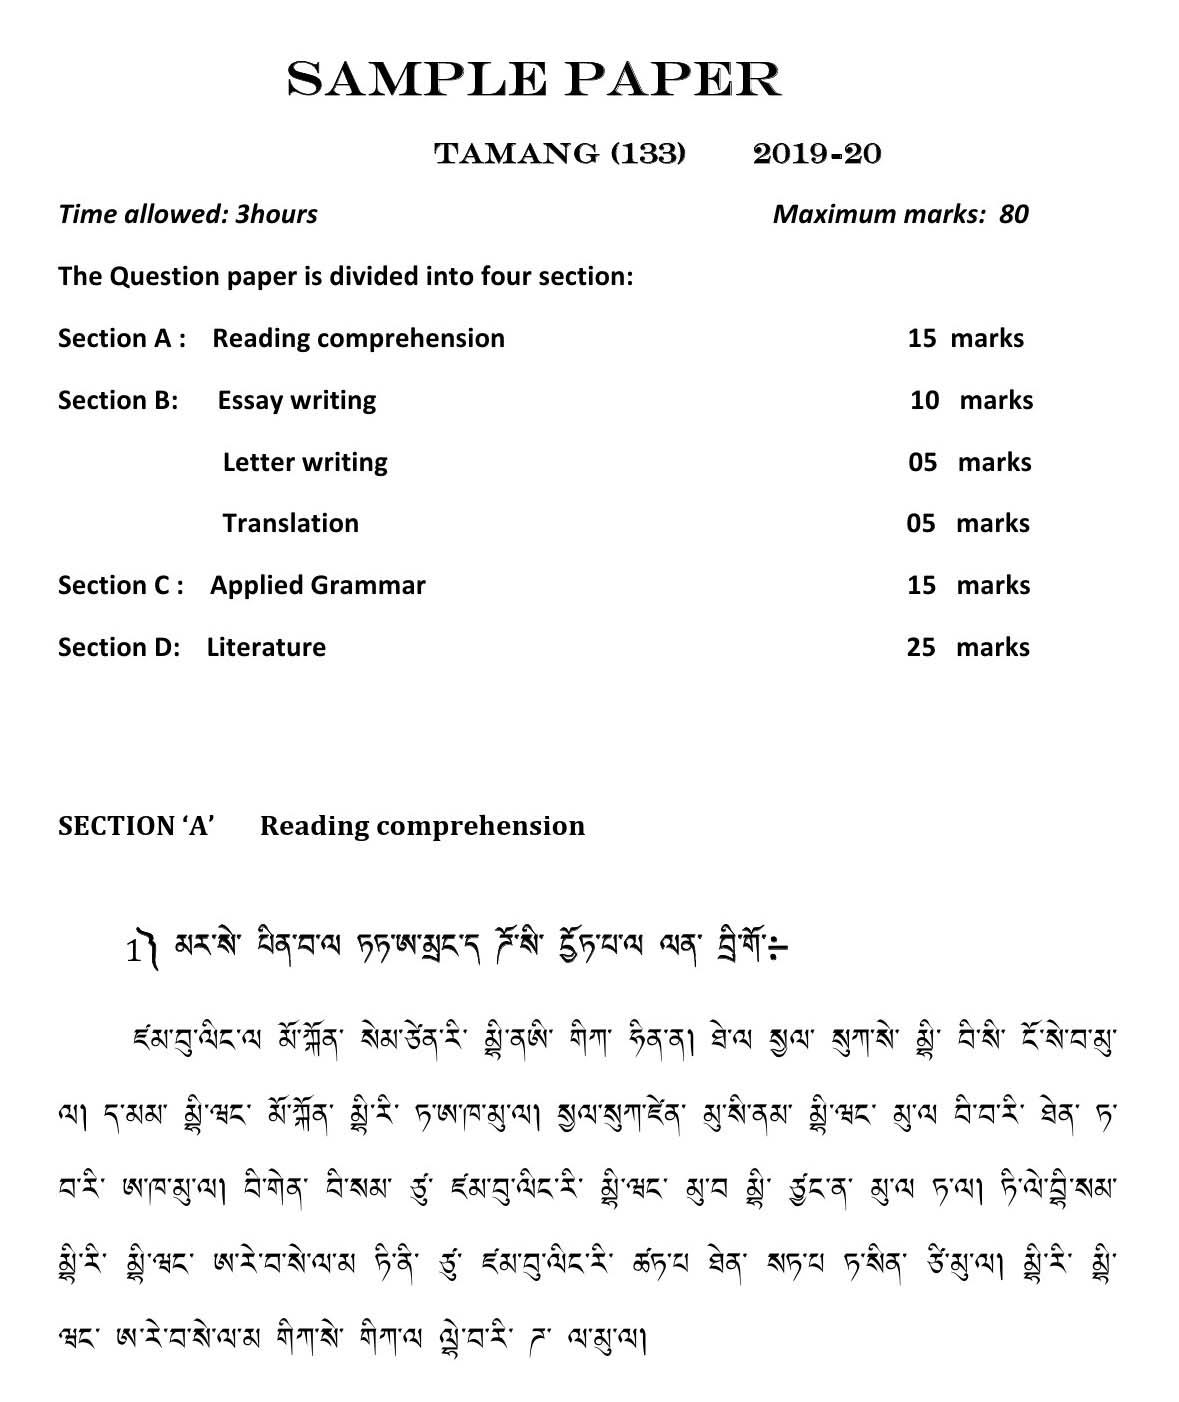 Tamang CBSE Class X Sample Question Paper 2019 20 - Image 1